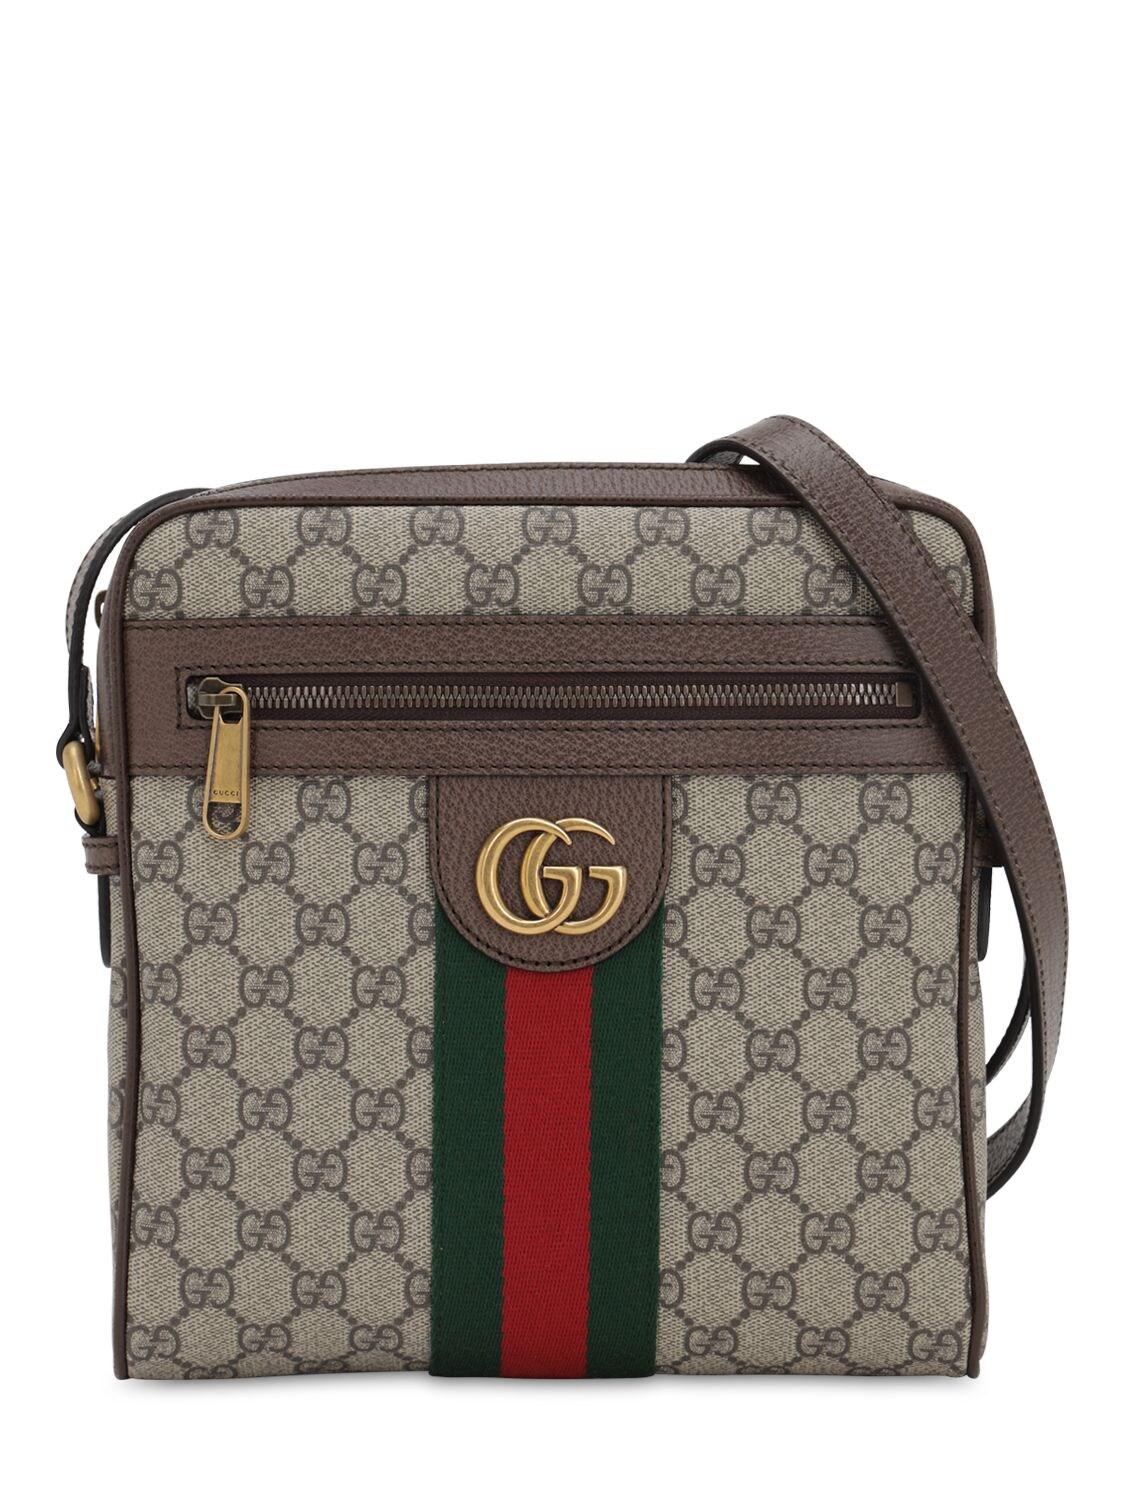 Gucci Leather Ophidia GG Small Messenger Bag in Beige (Natural) for Men - Save 3% - Lyst